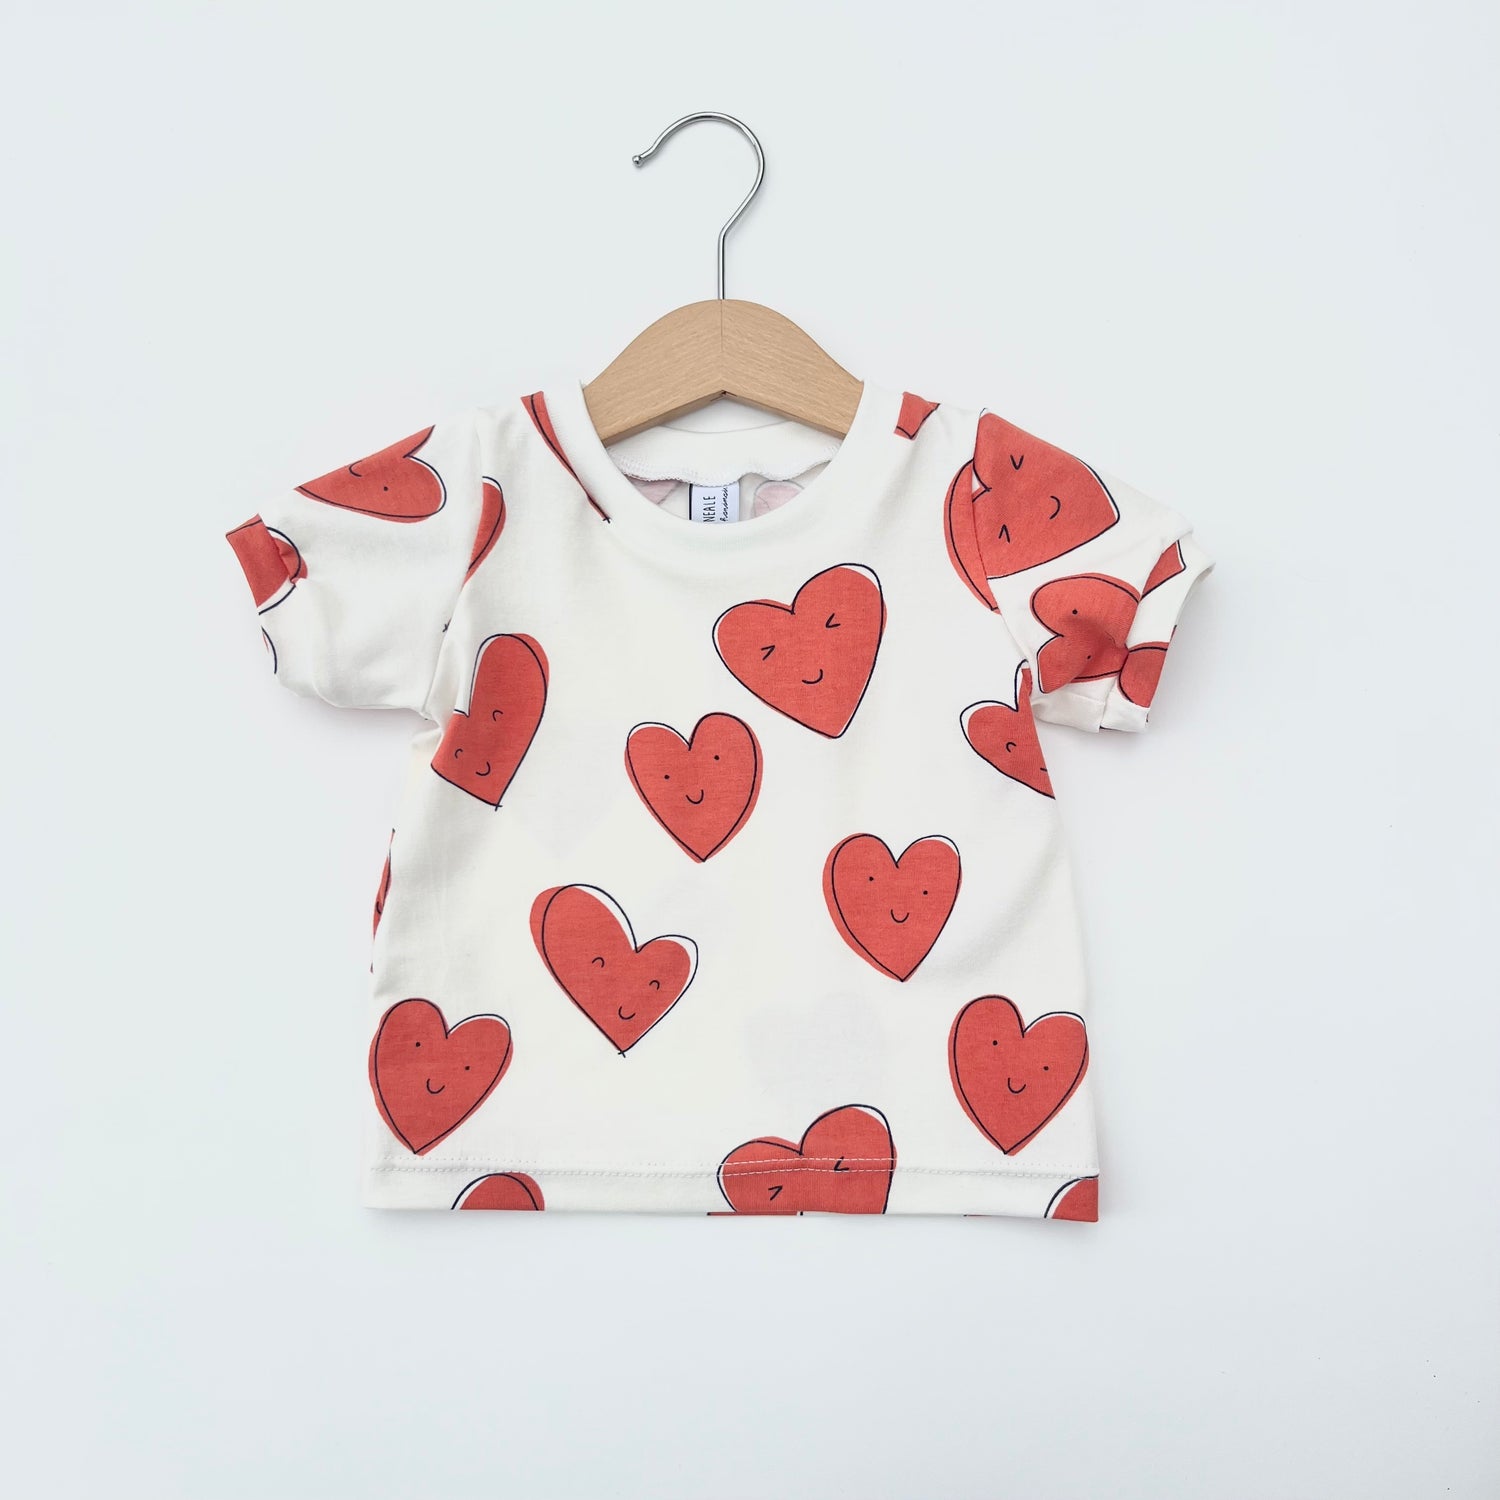 Love with no boundaries Essential T-Shirt for Sale by thecuteart